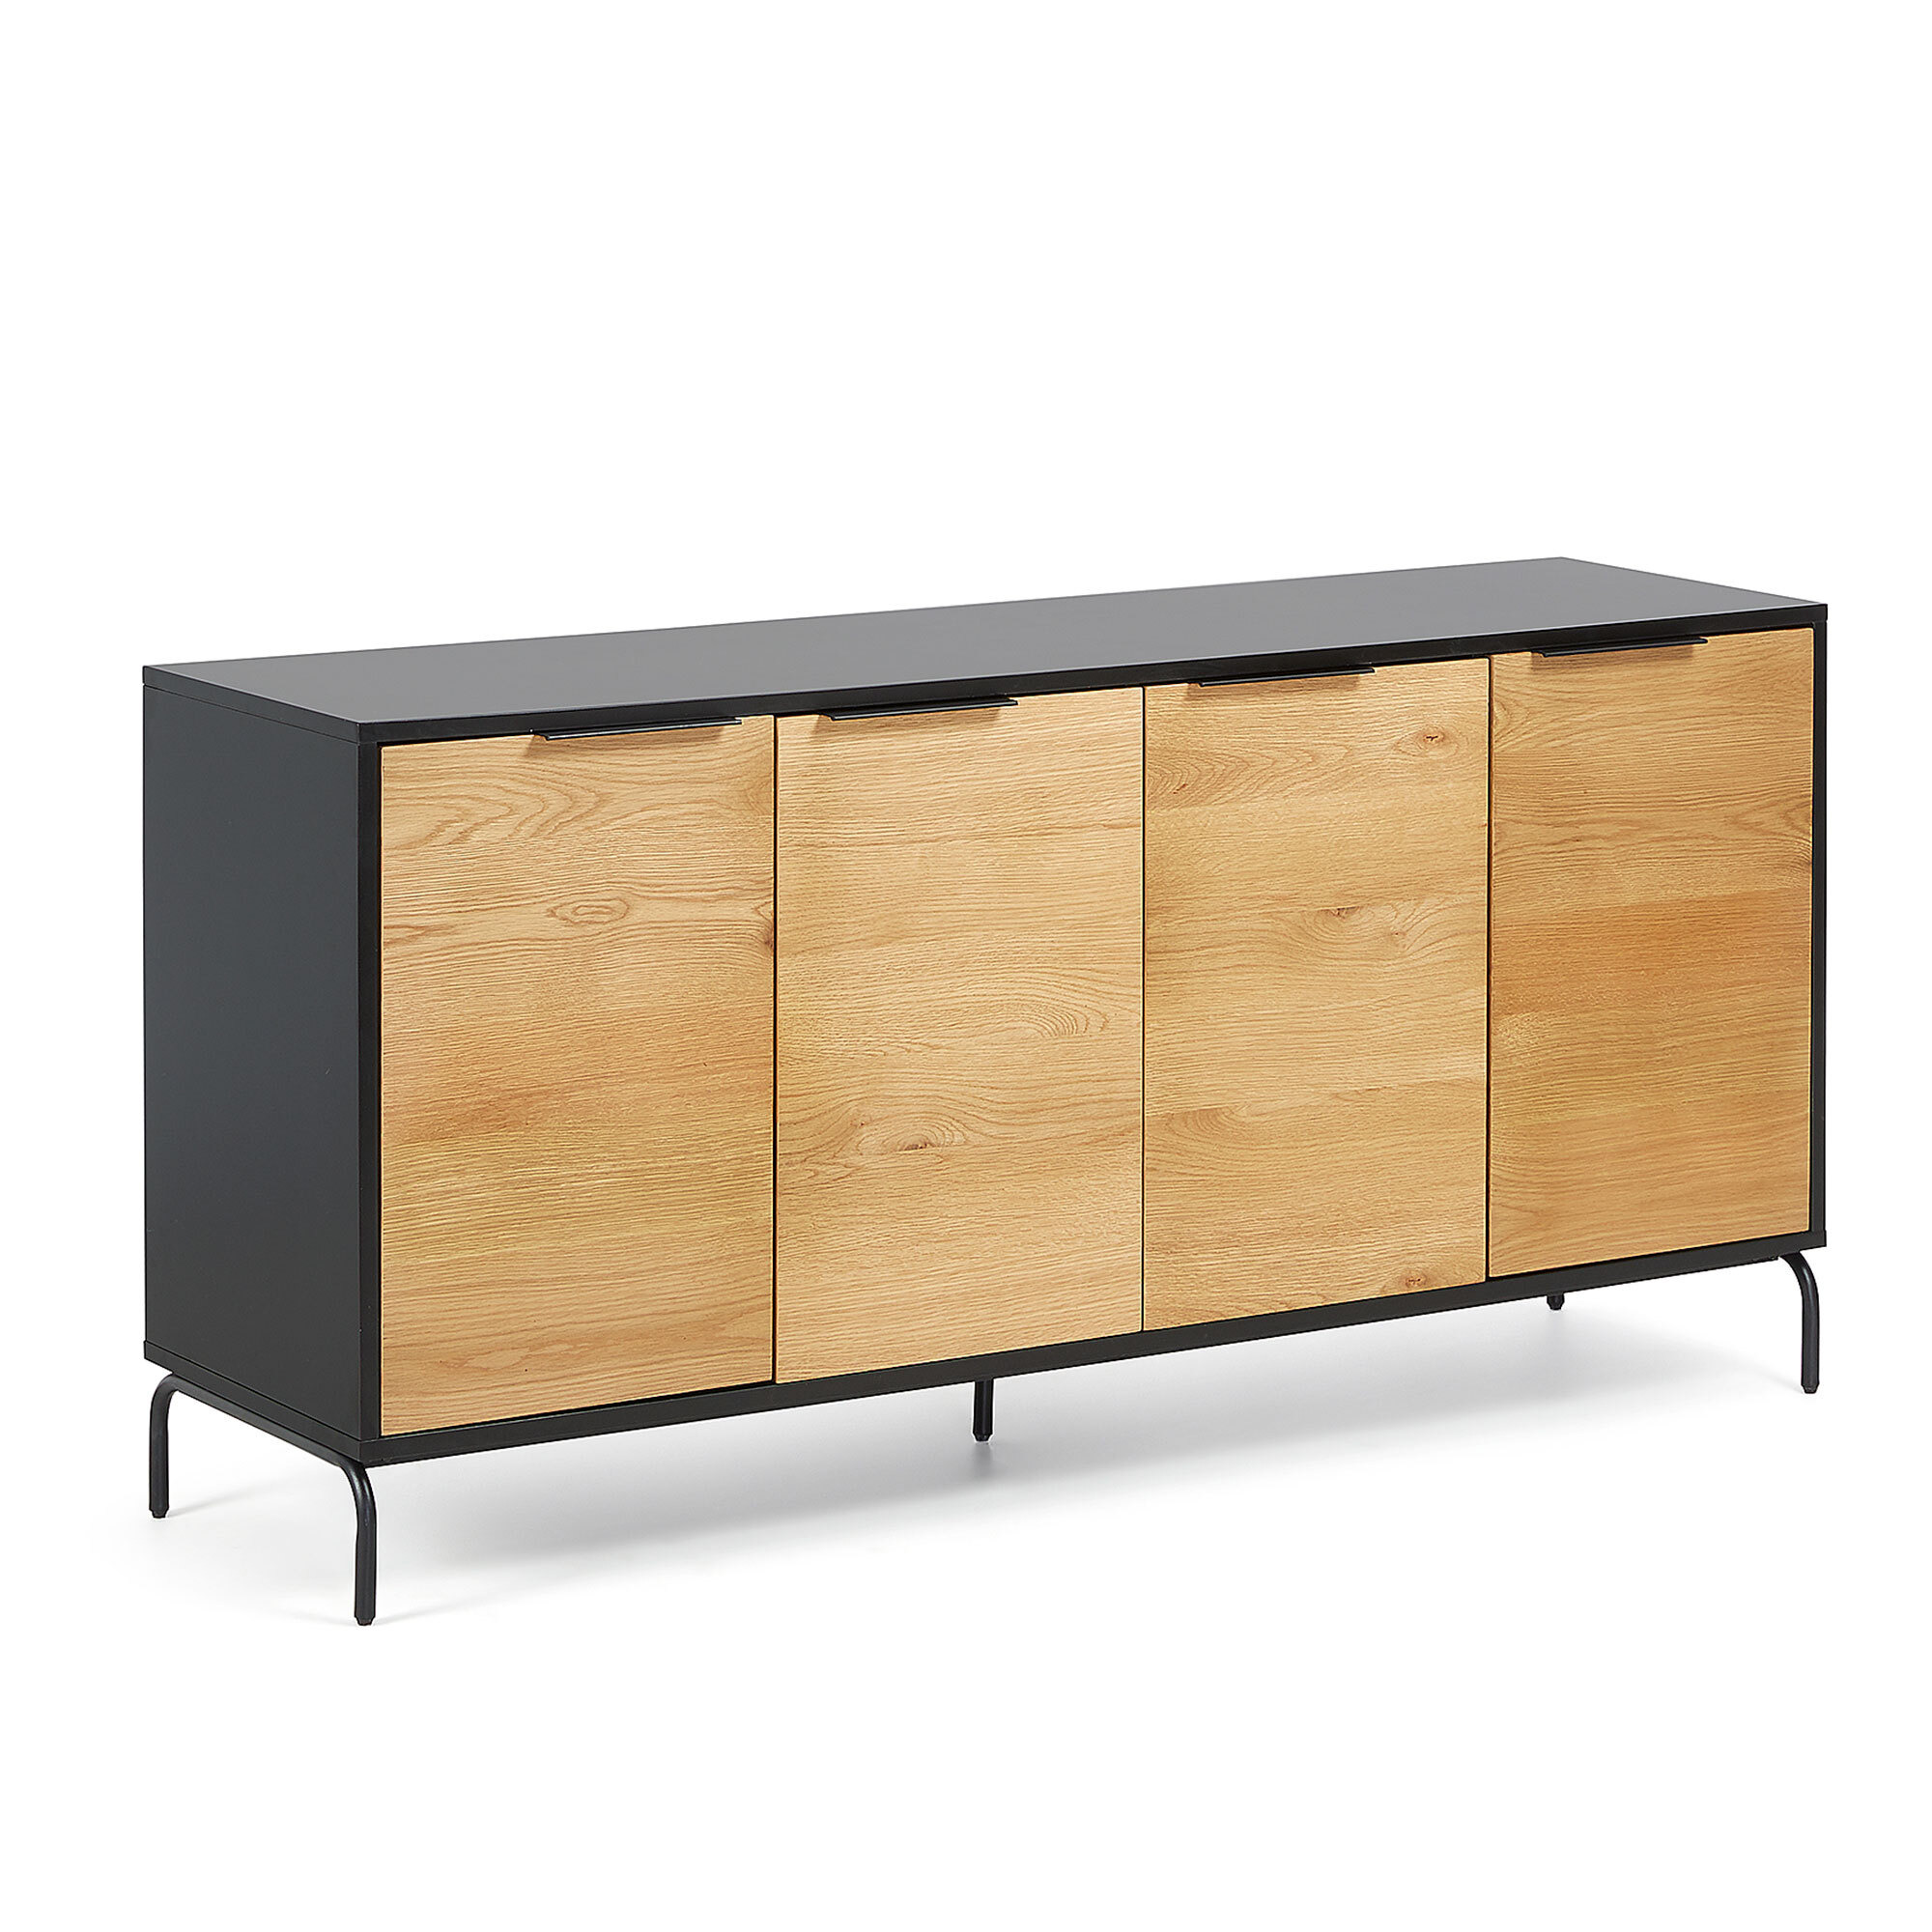 Savoi 4 door MDF sideboard with black lacquer & painted steel, 165 x 80 cm